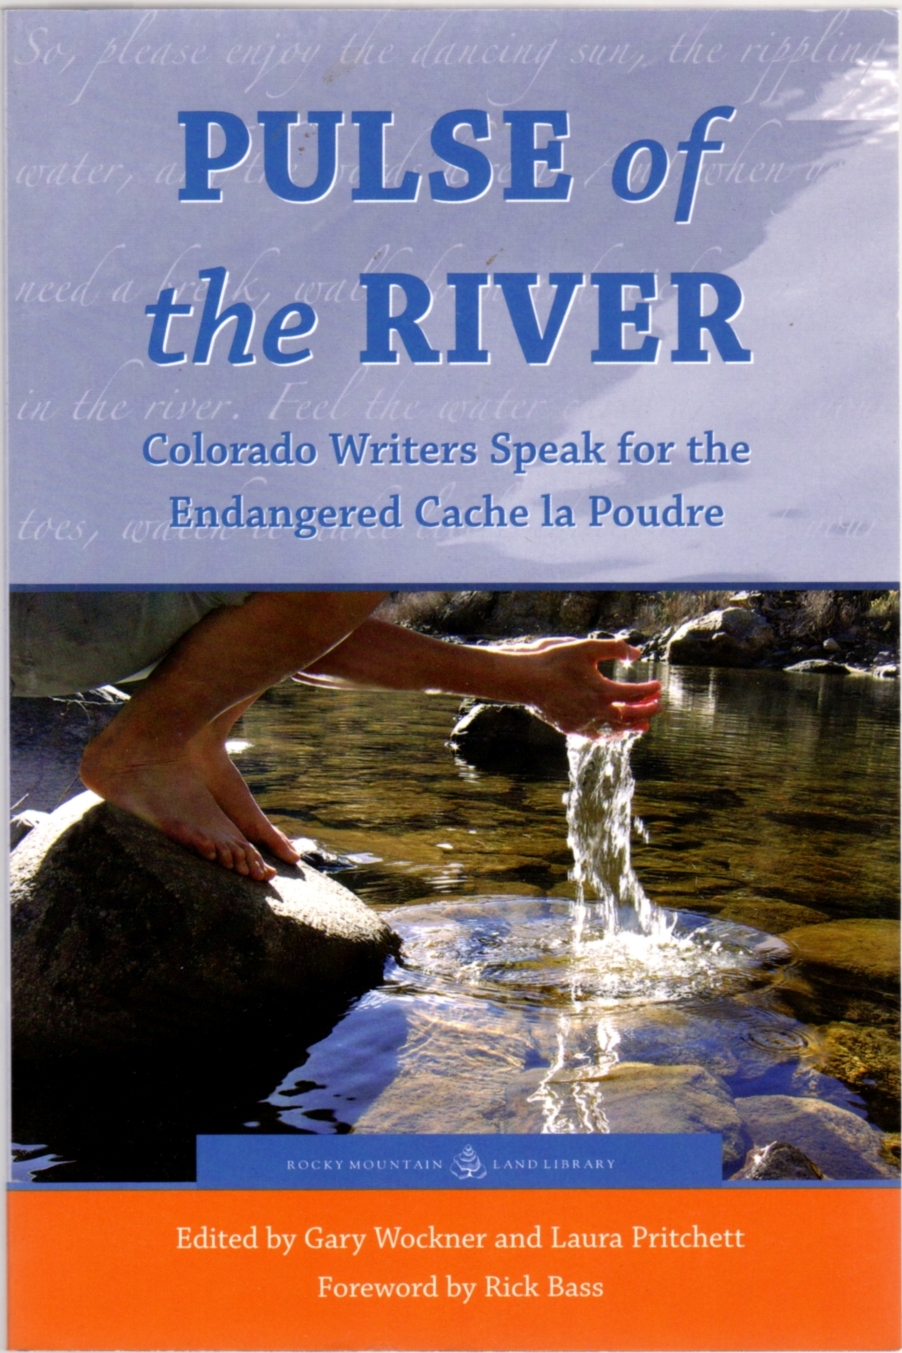 Pulse of the River: Colorado Writers Speak for the Endangered Cache la Poudre - Wockner, Gary; Pritchett, Laura (editors); Foreword by Rick Bass